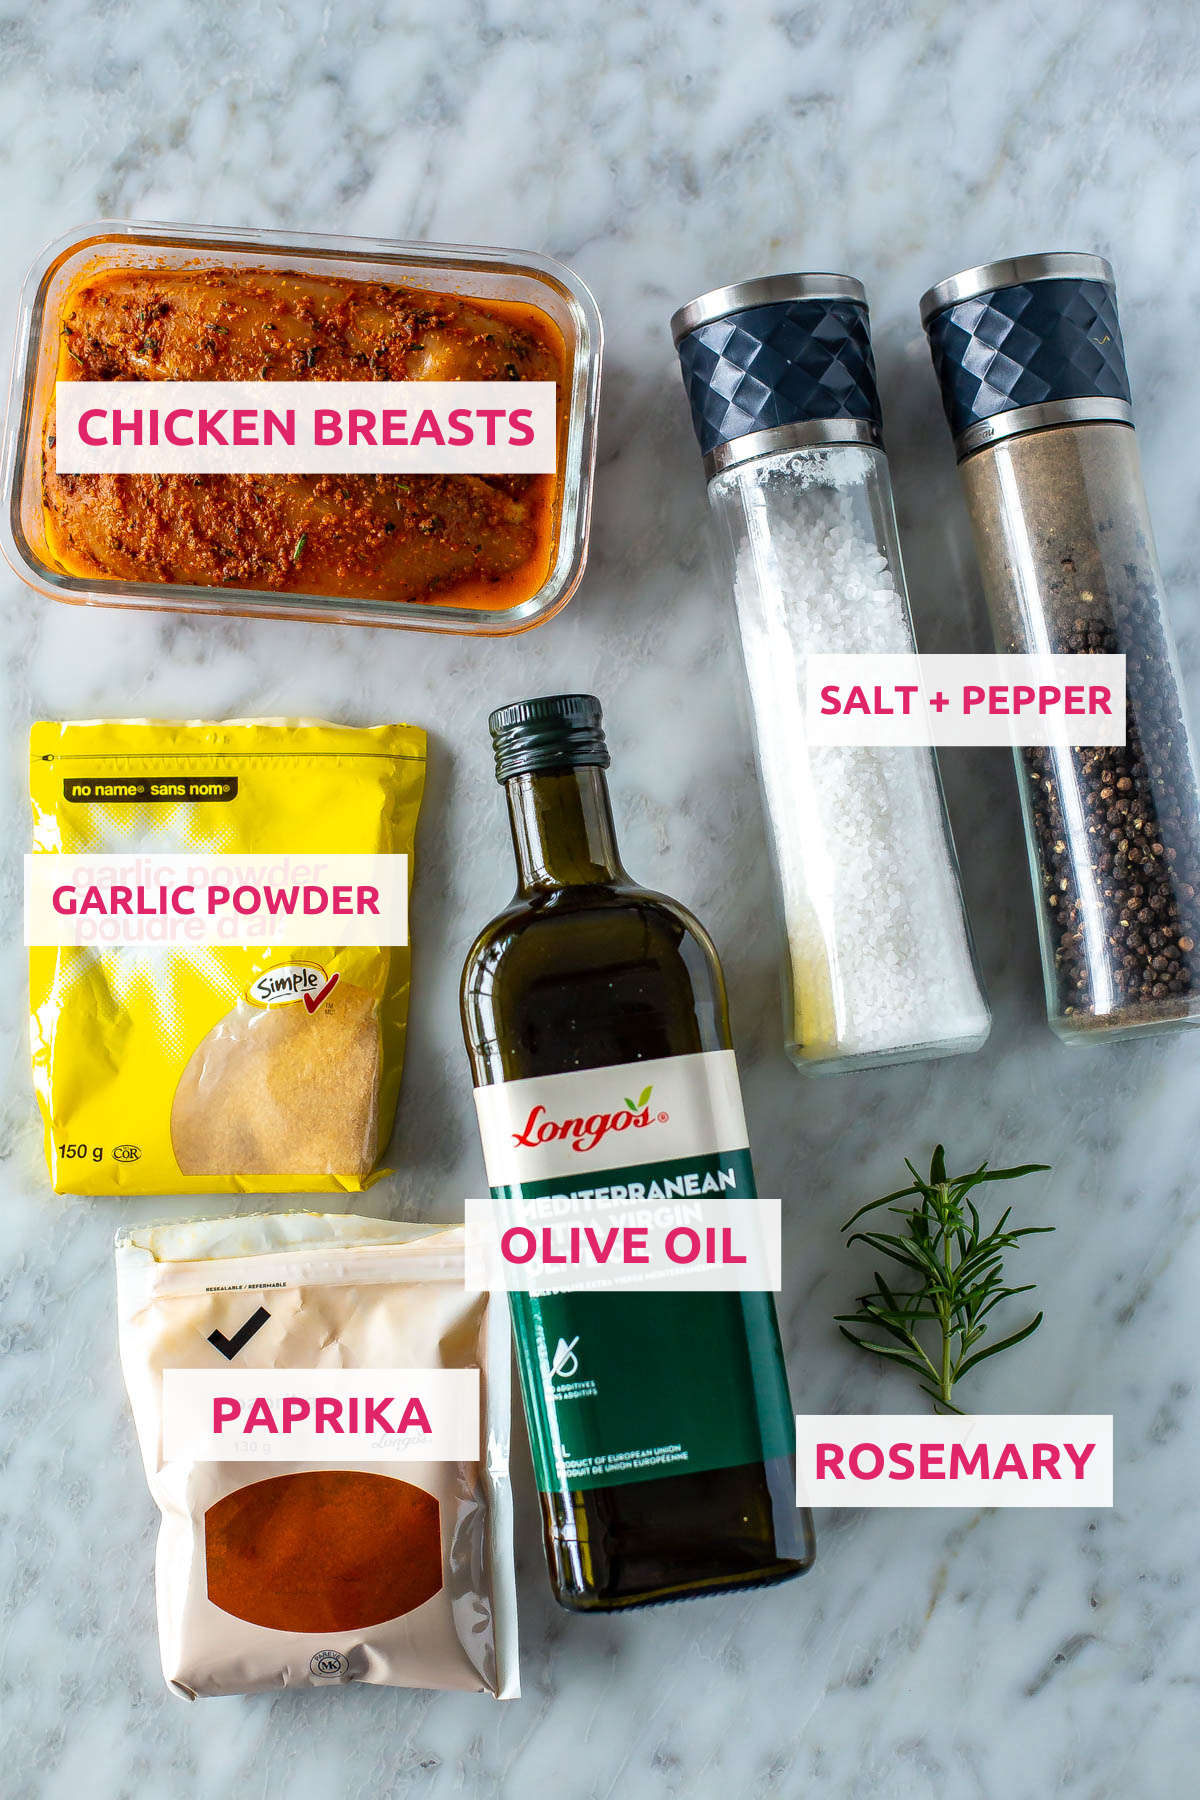 Ingredients for air fryer chicken breasts: chicken breasts, garlic powder, paprika, olive oil, fresh rosemary, salt and pepper.